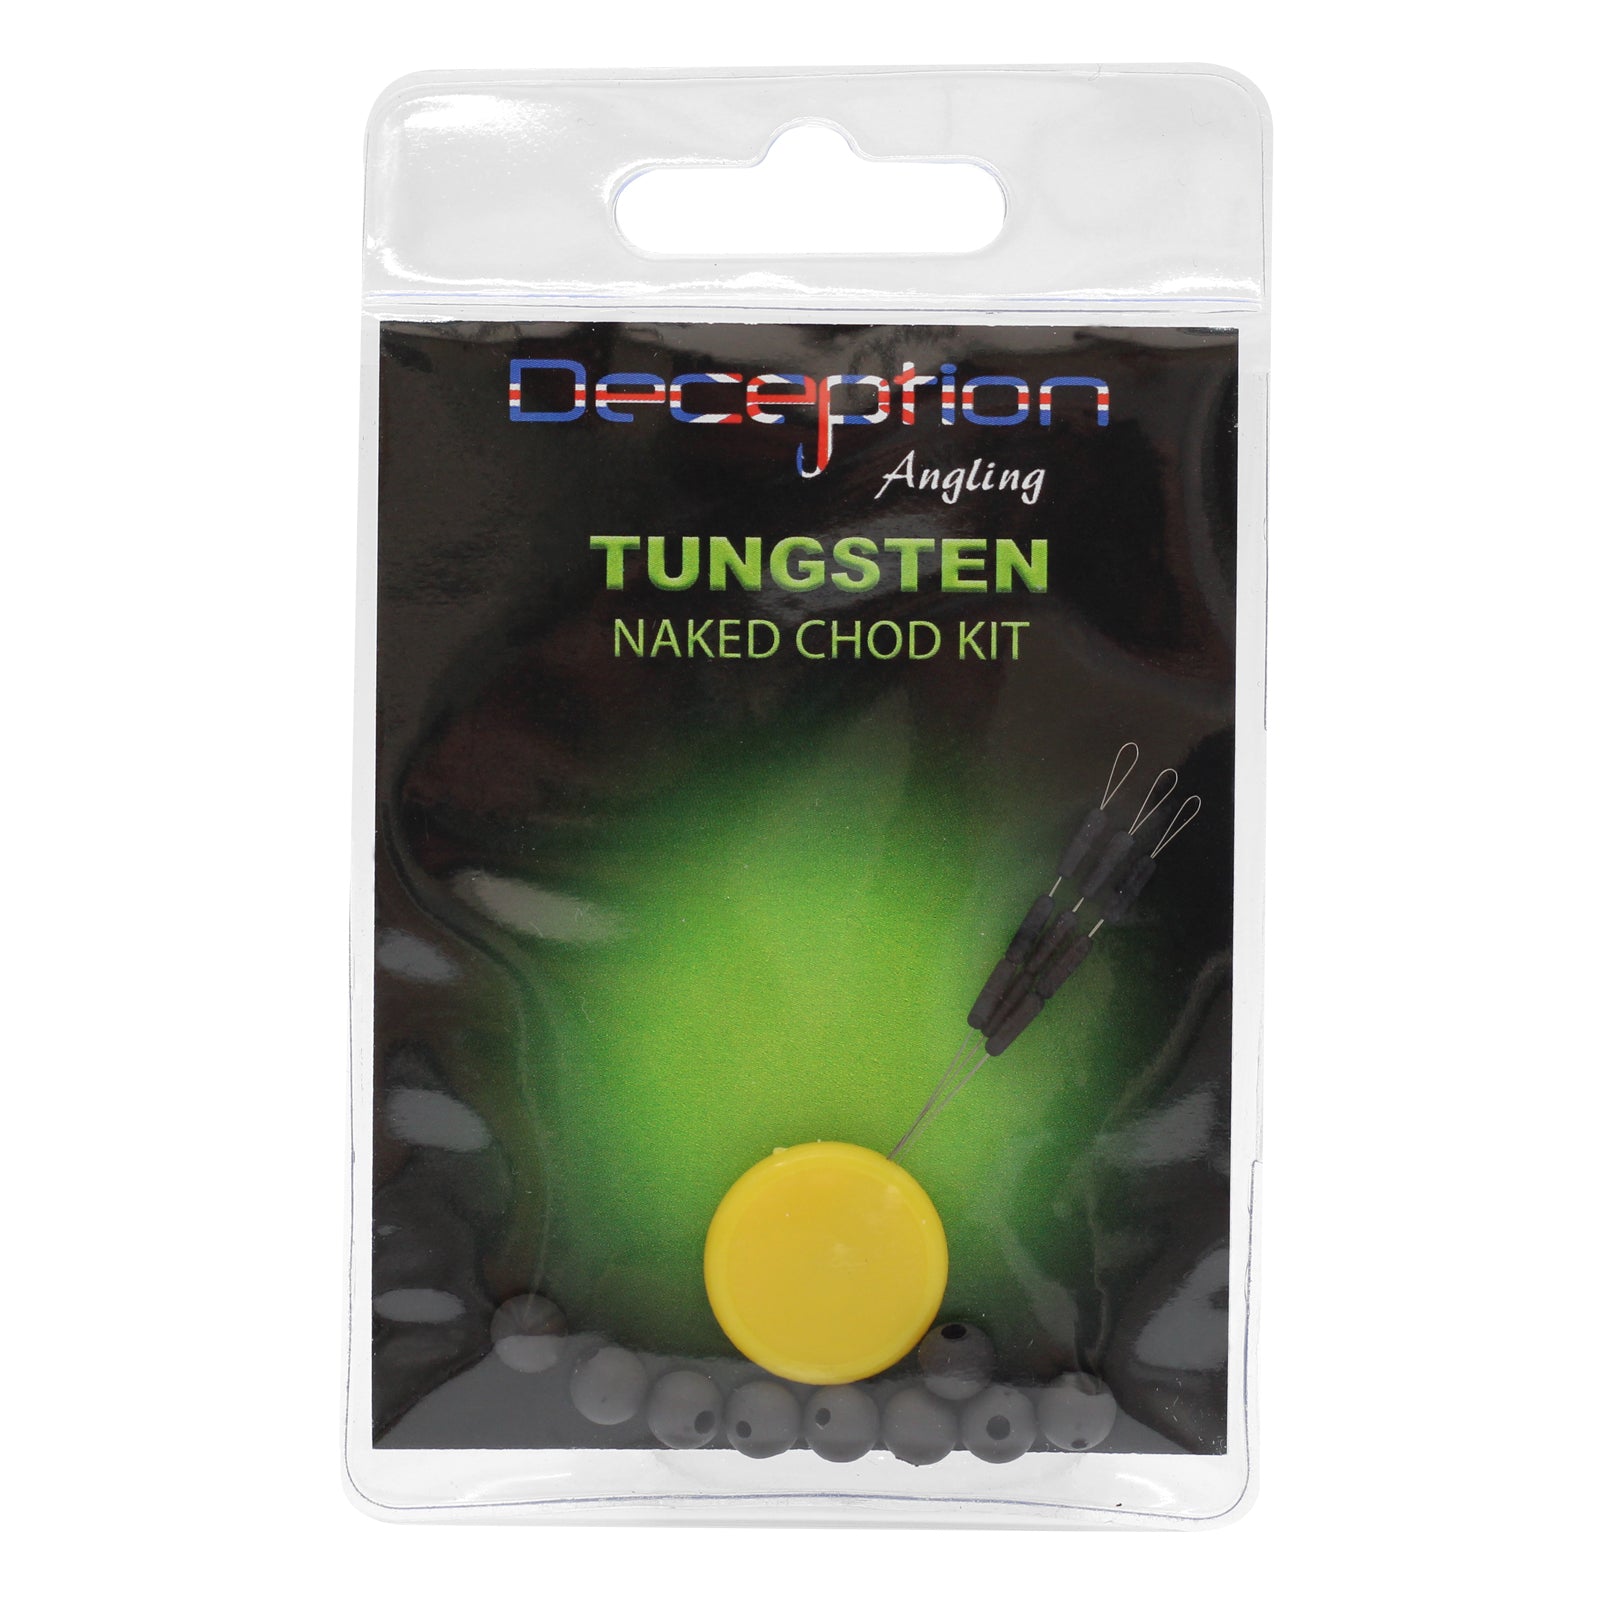 Deception Angling Tungsten Naked Chod Kit for Fishing